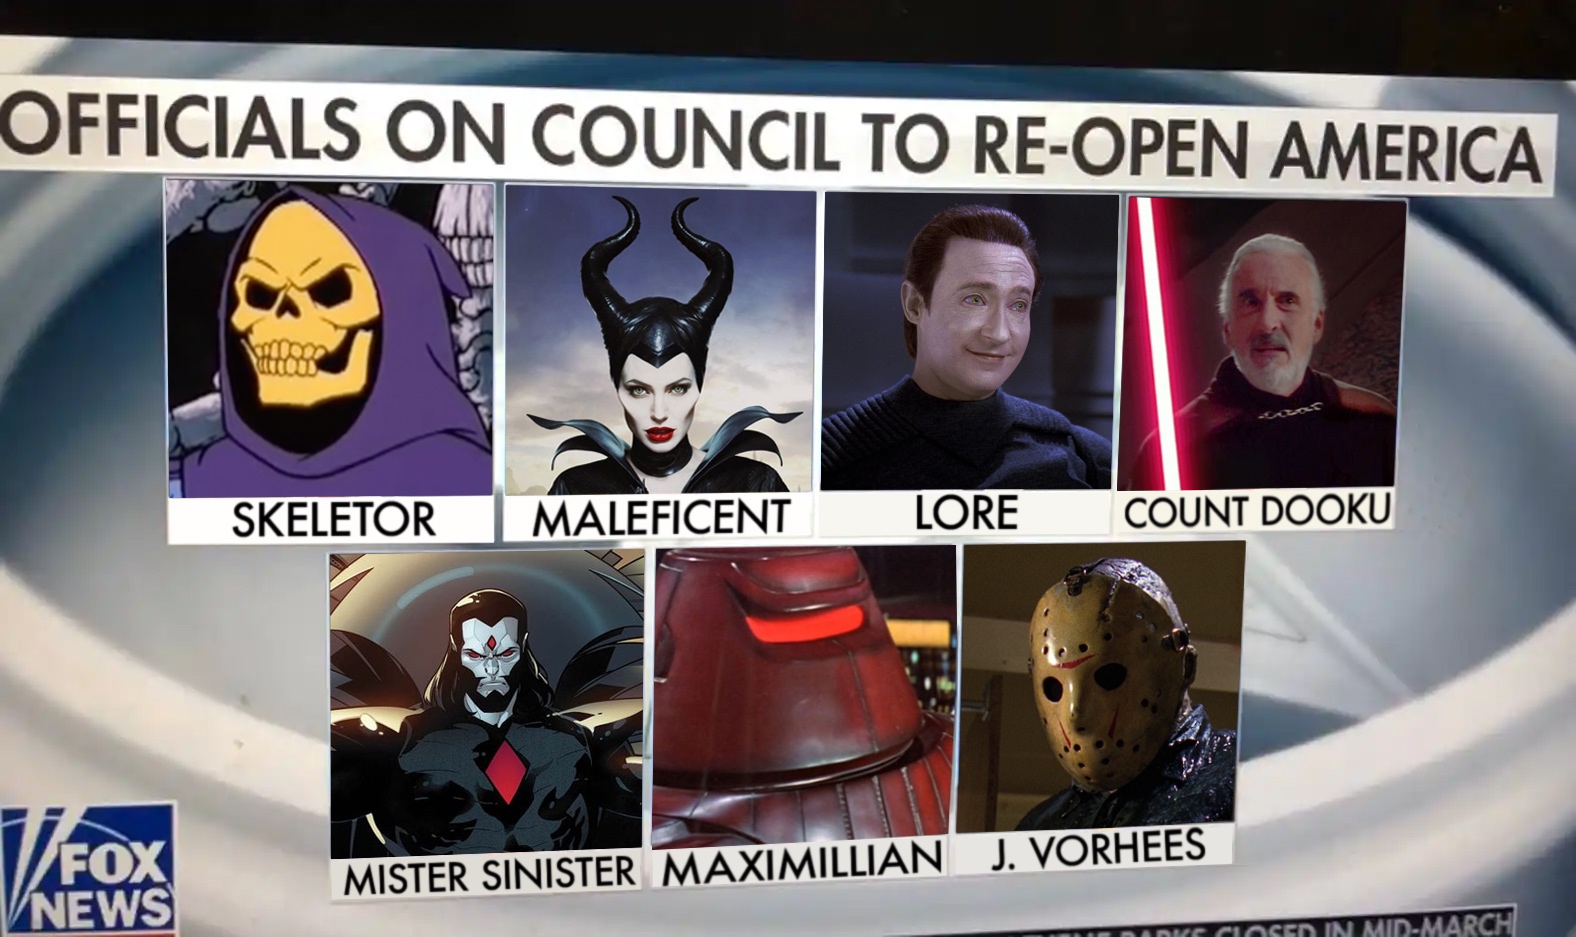 fox news - Officials On Council To ReOpen America O Lore Maleficent Count Dooku Skeletor J. Vorhees Mister Sinister Maximillian Lased In MidMarch